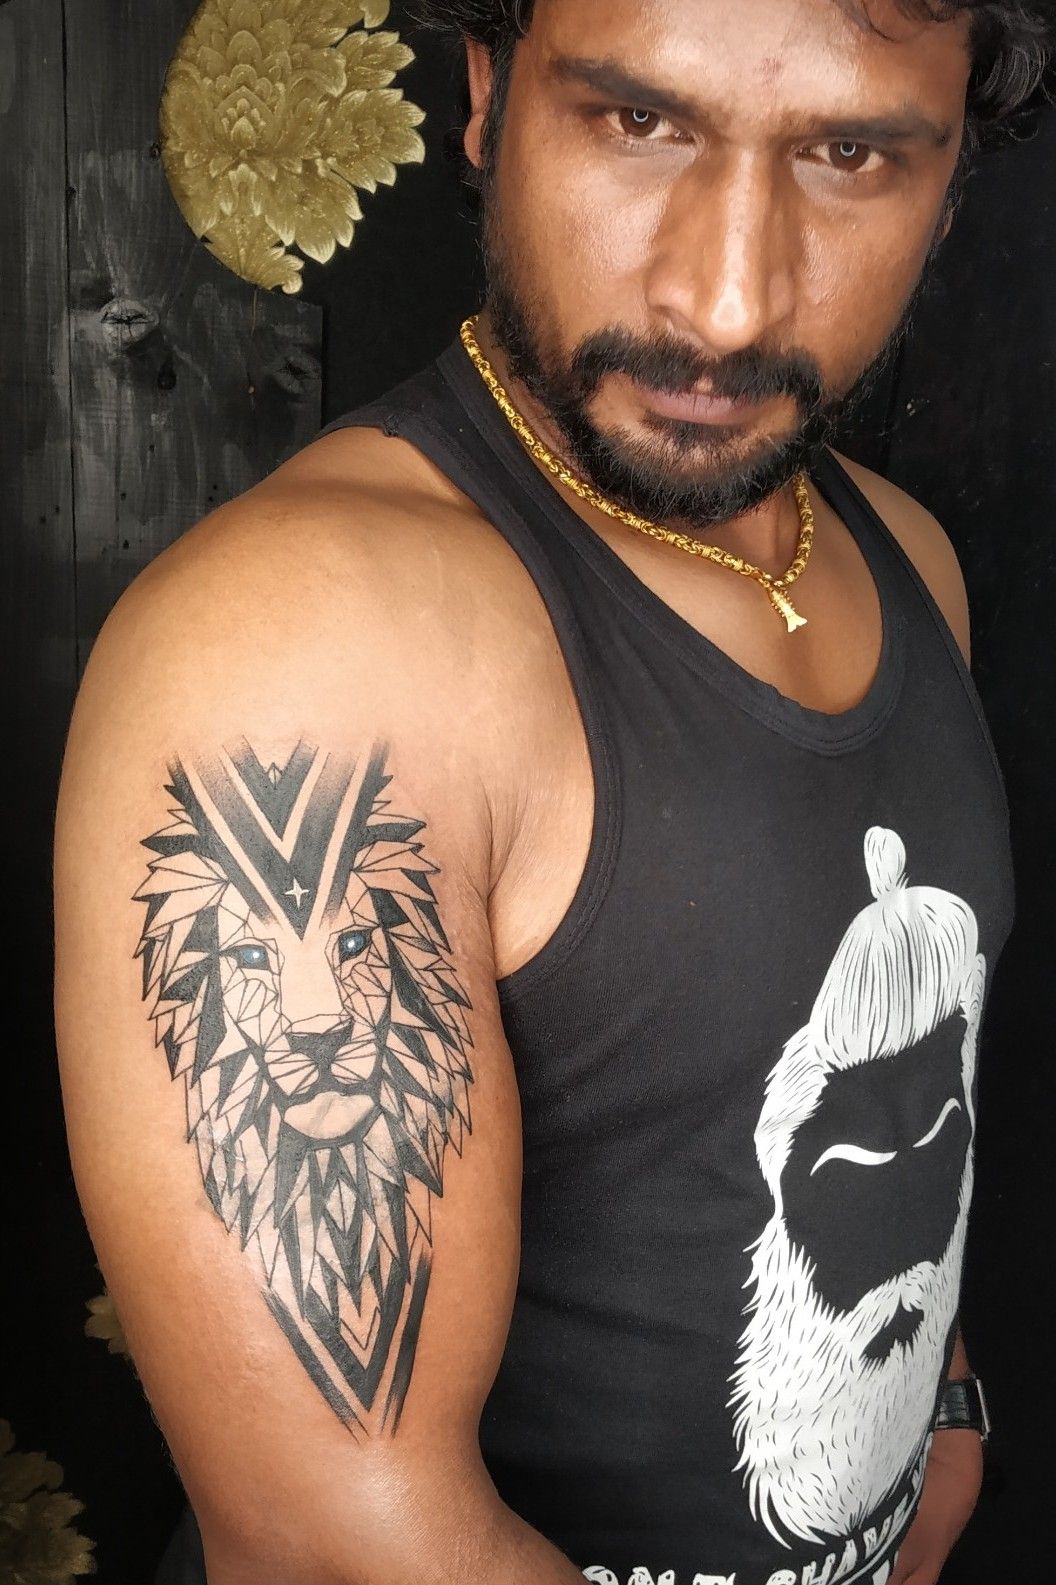 Cool tattoos sported by our Kollywood celebs - Suryan FM